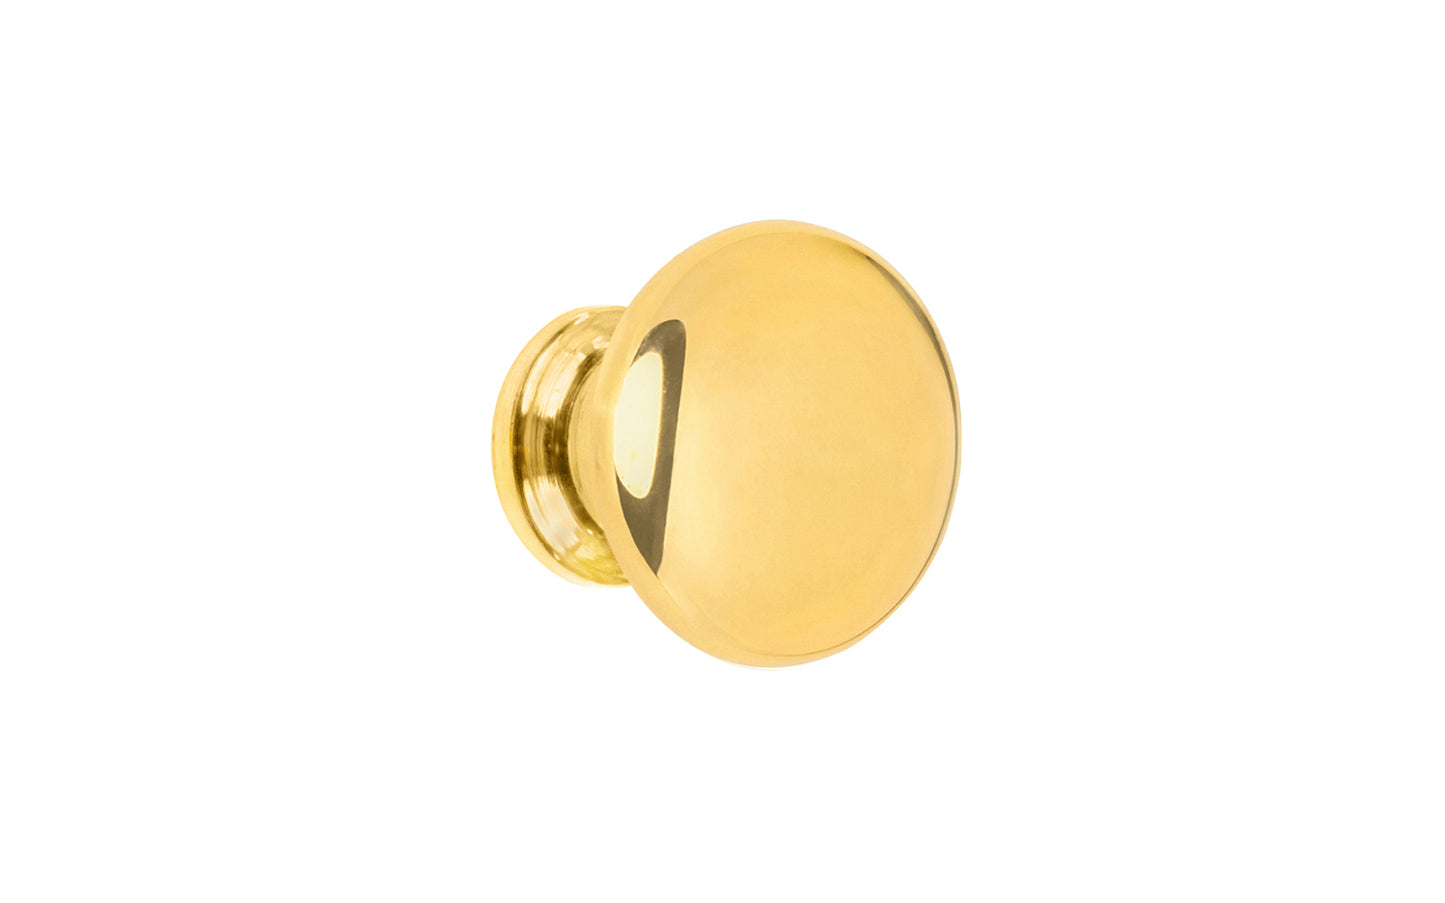 A classic & traditional small unlacquered solid brass mini knob. 3/4" diameter. The knob is made of non-lacquered brass (the unlacquered brass will patina over time). The mini "mushroom" knob is ideal for small drawers, bookcases, cubbyholes, small boxes, & other small furniture pieces & cabinets. Non-Lacquered Brass (will patina naturally over time)